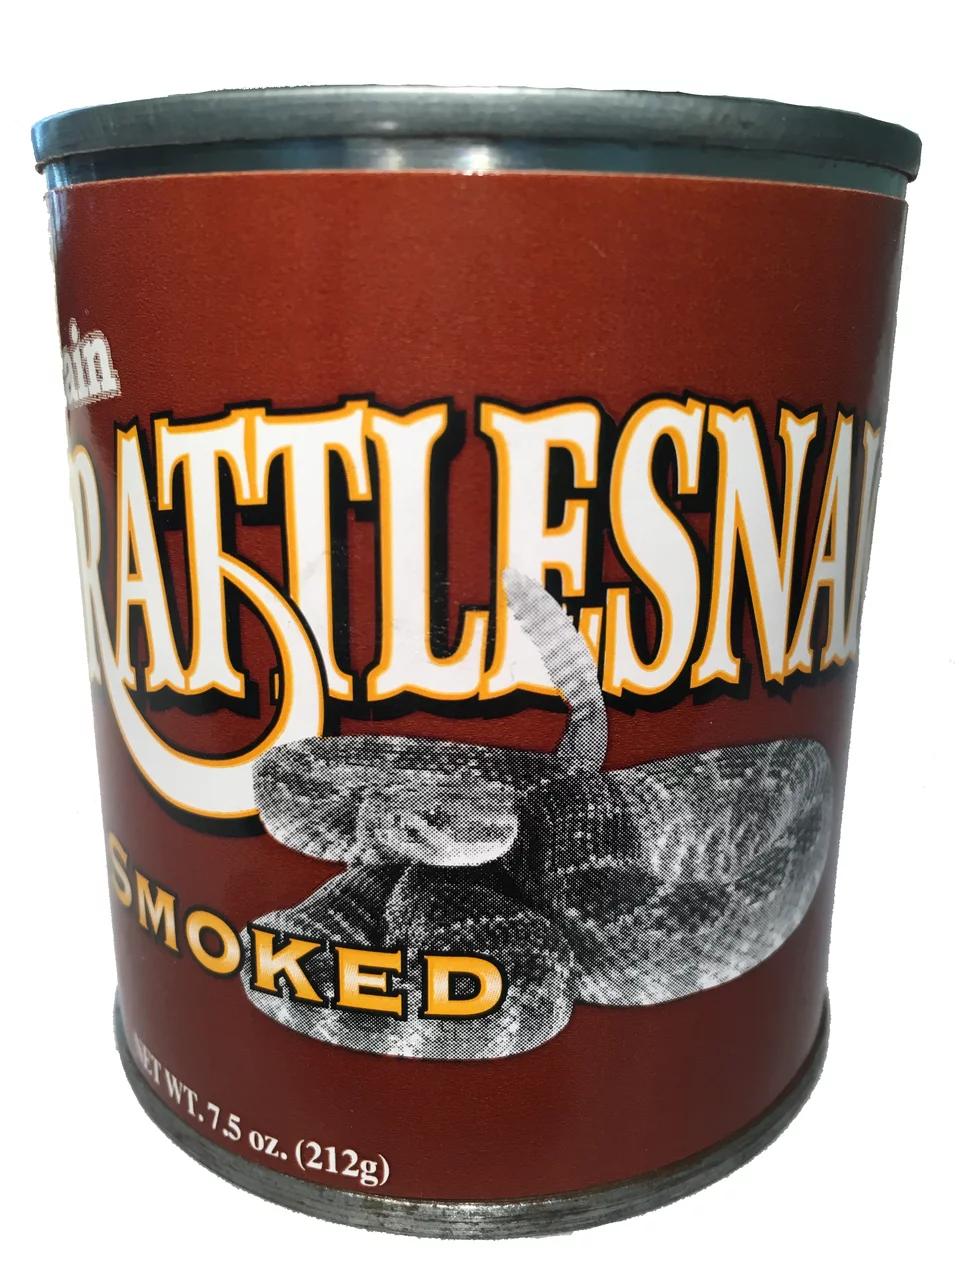 smoked rattlesnake - Can you buy canned rattlesnake meat